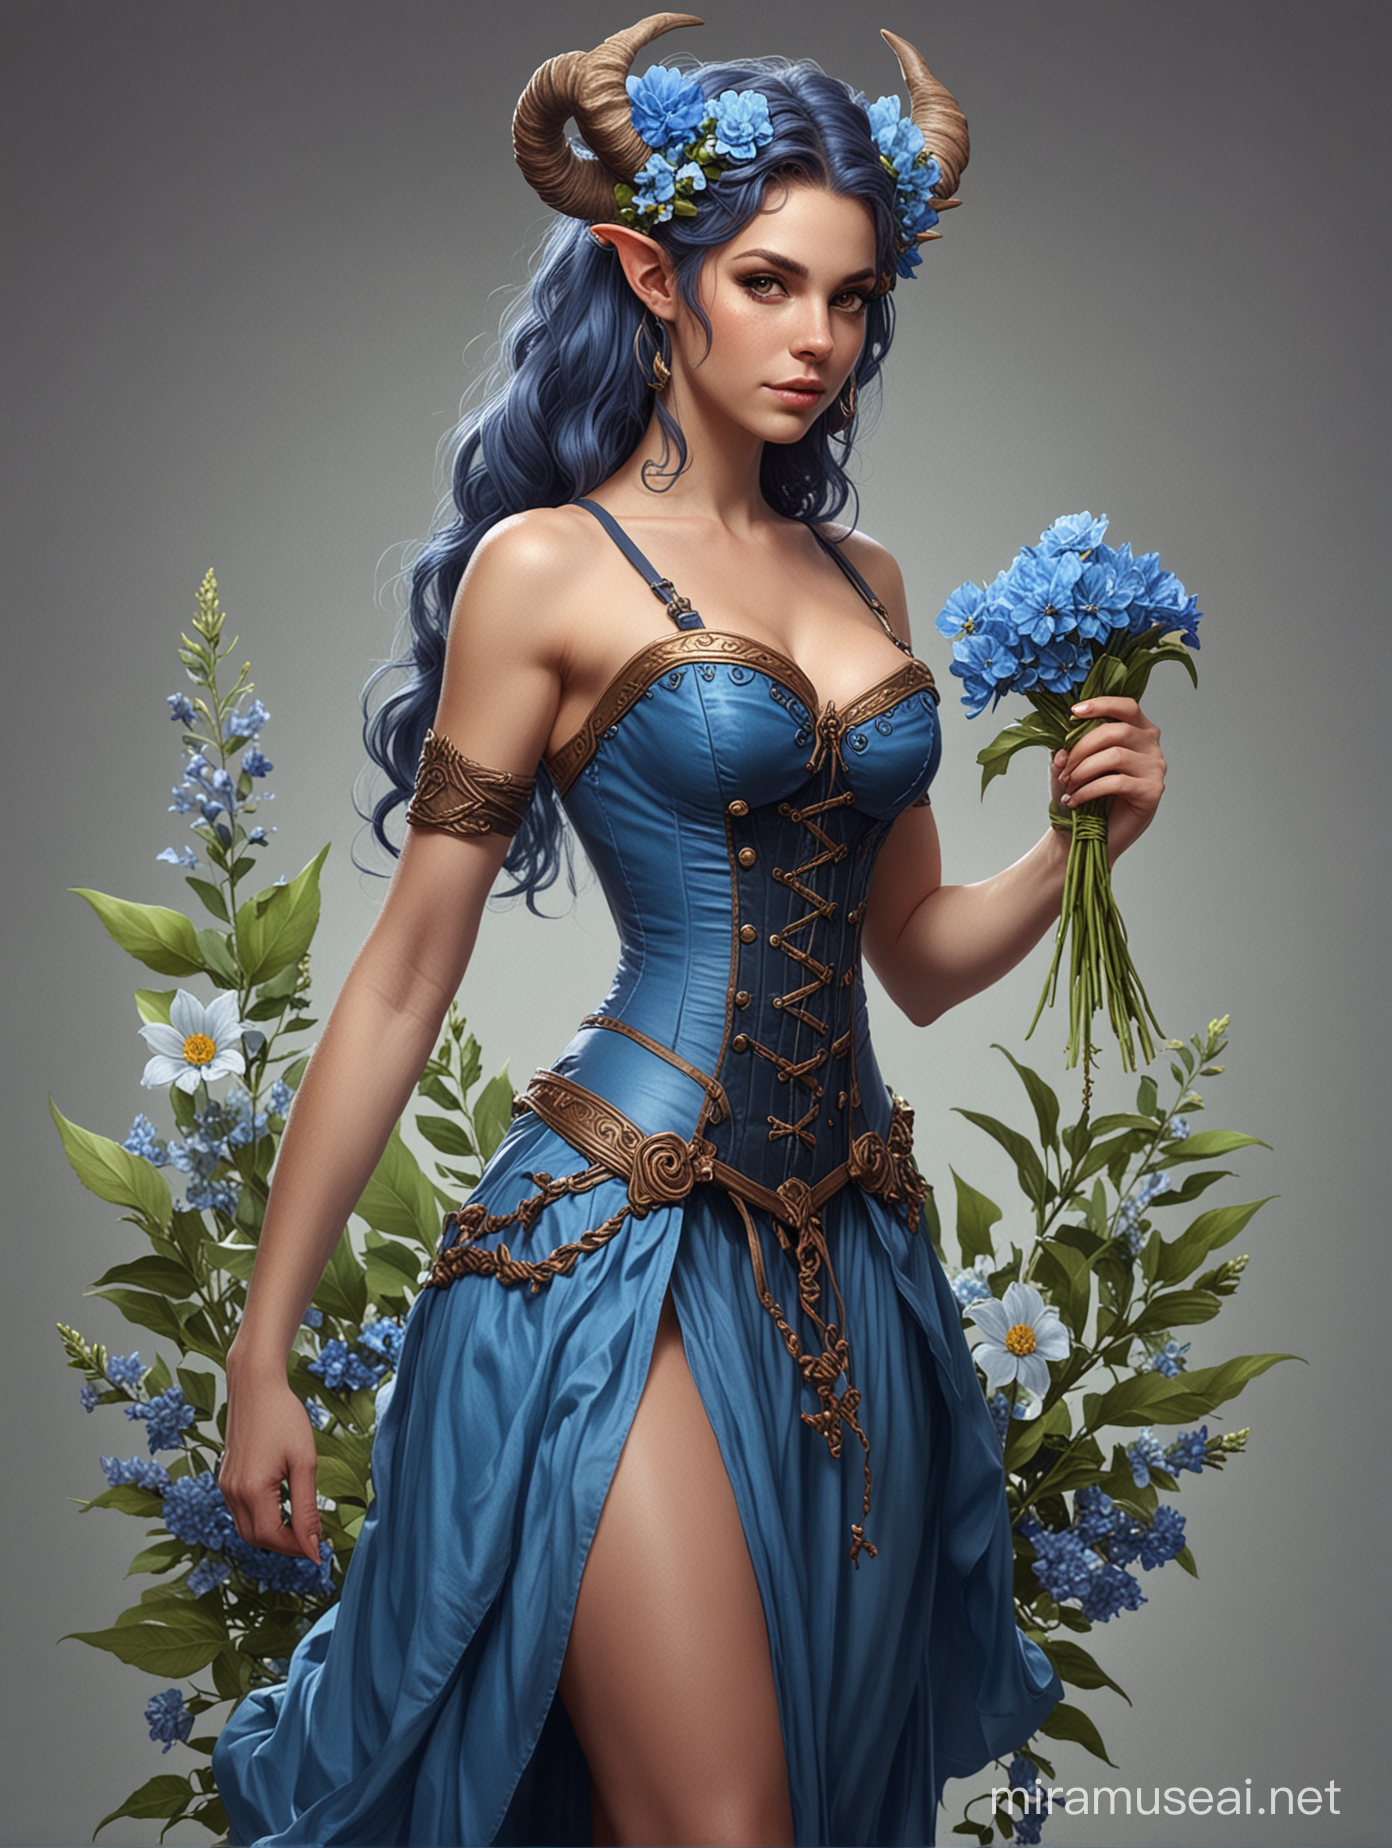 Enchanting Female DnD Satyr in Blue Corset Dress with Floral Adornments